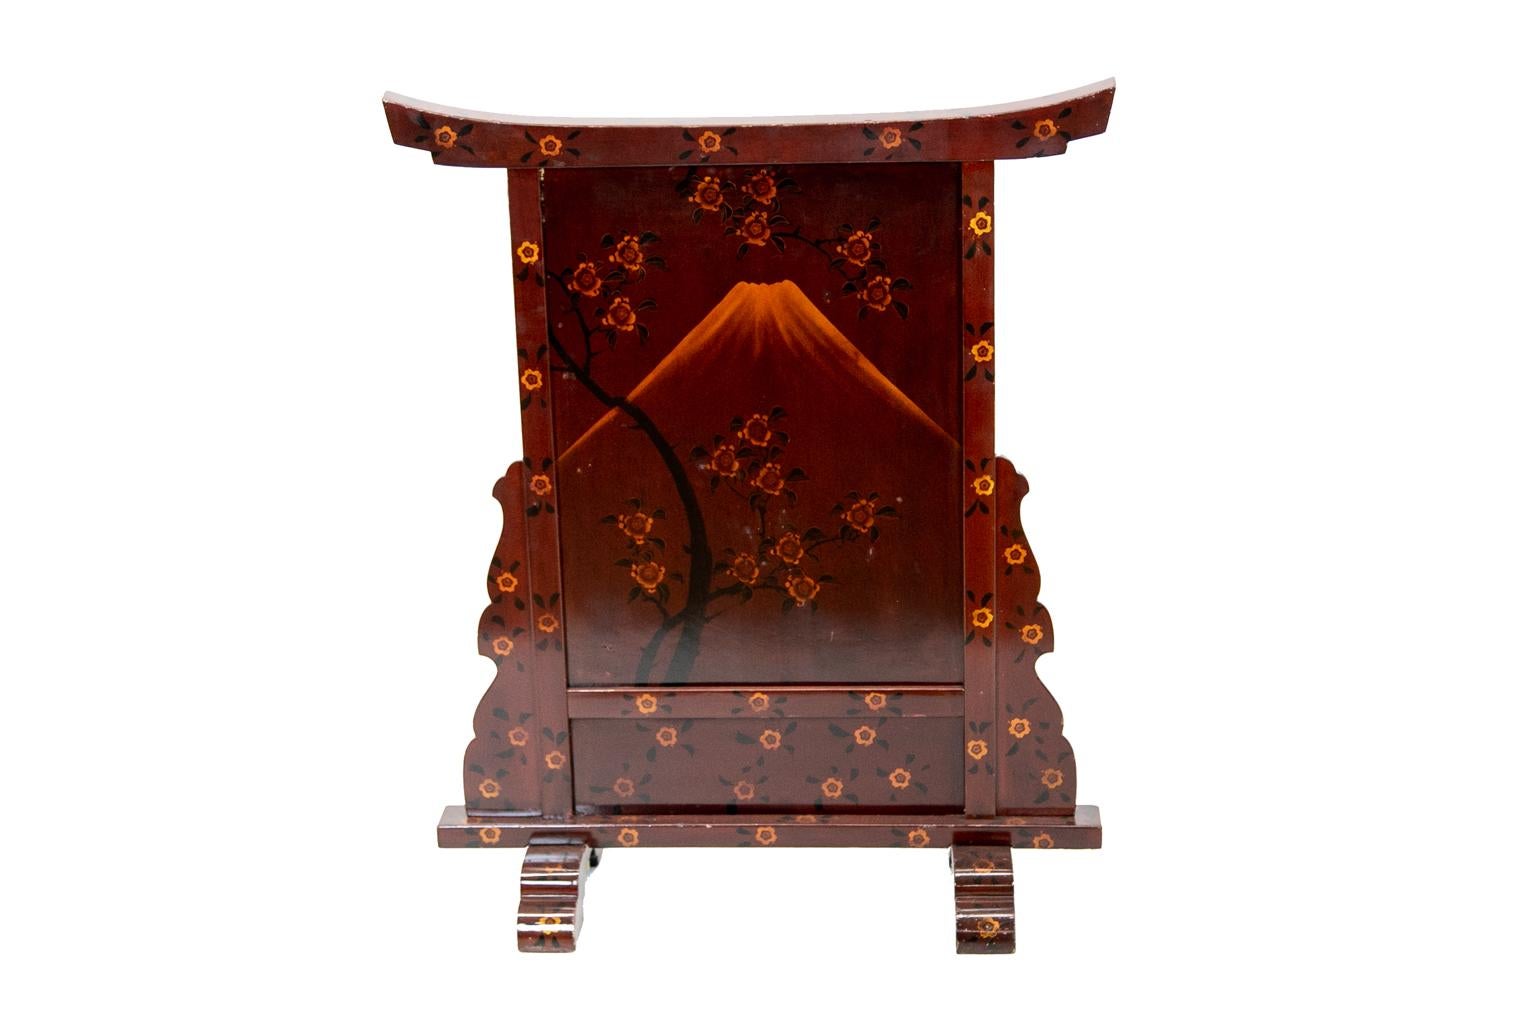 20th Century Japanese Lacquered Fire Screen